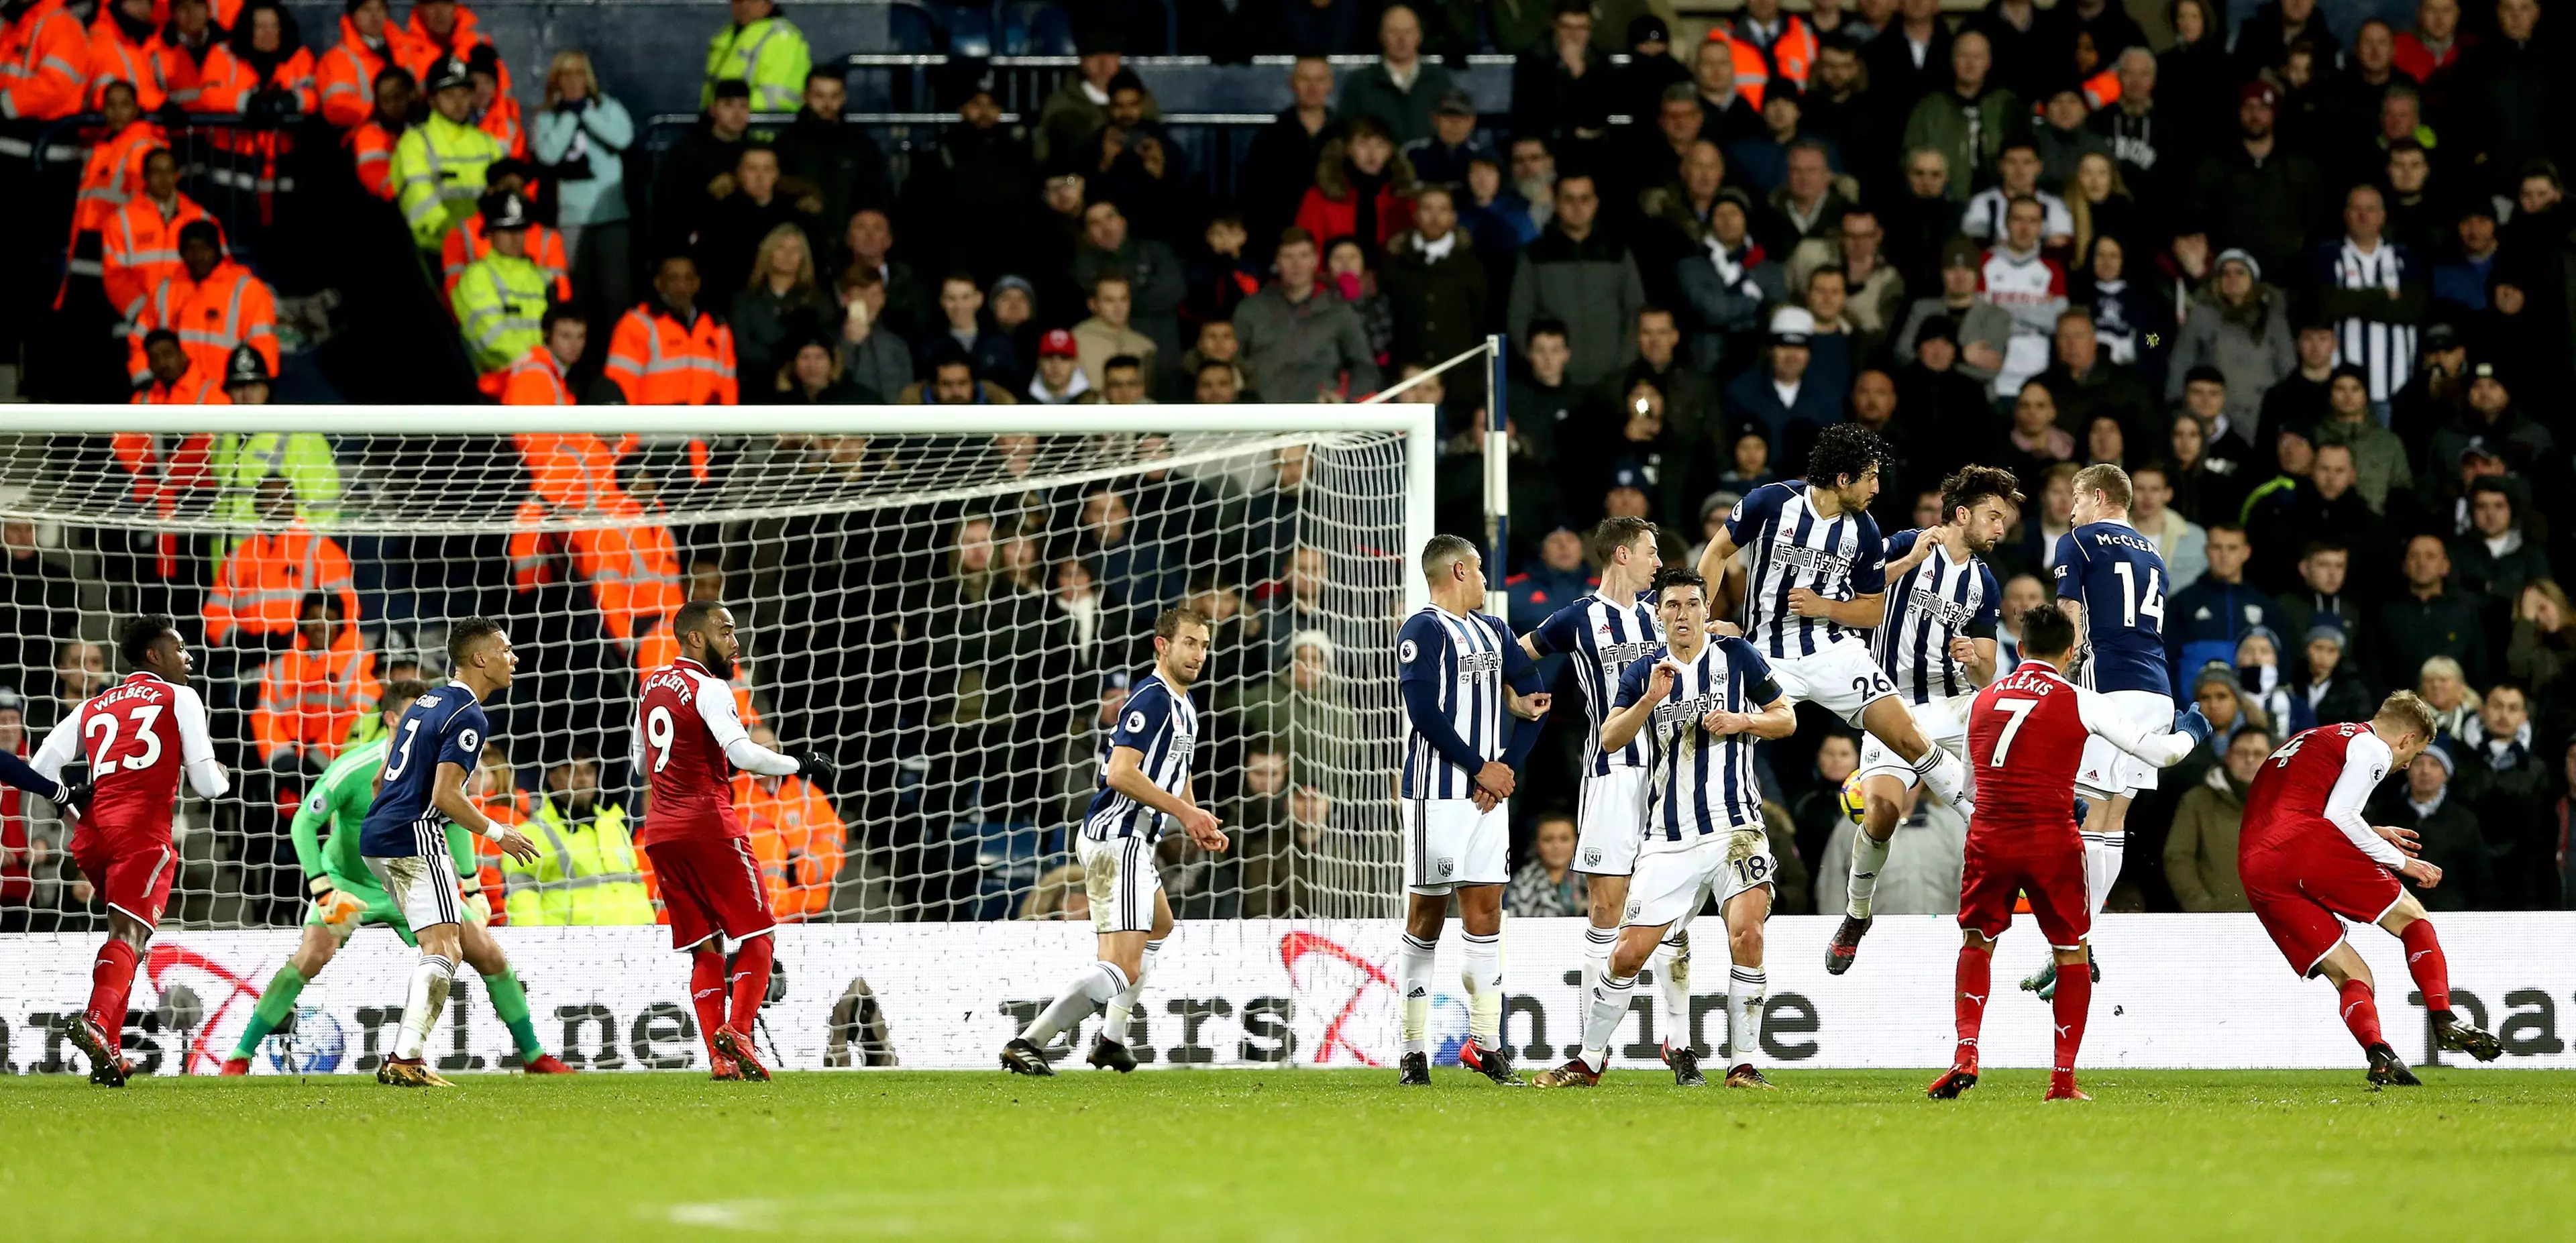 The winger turns his back on a free kick that was going wide until it hit him. Image: PA Images.